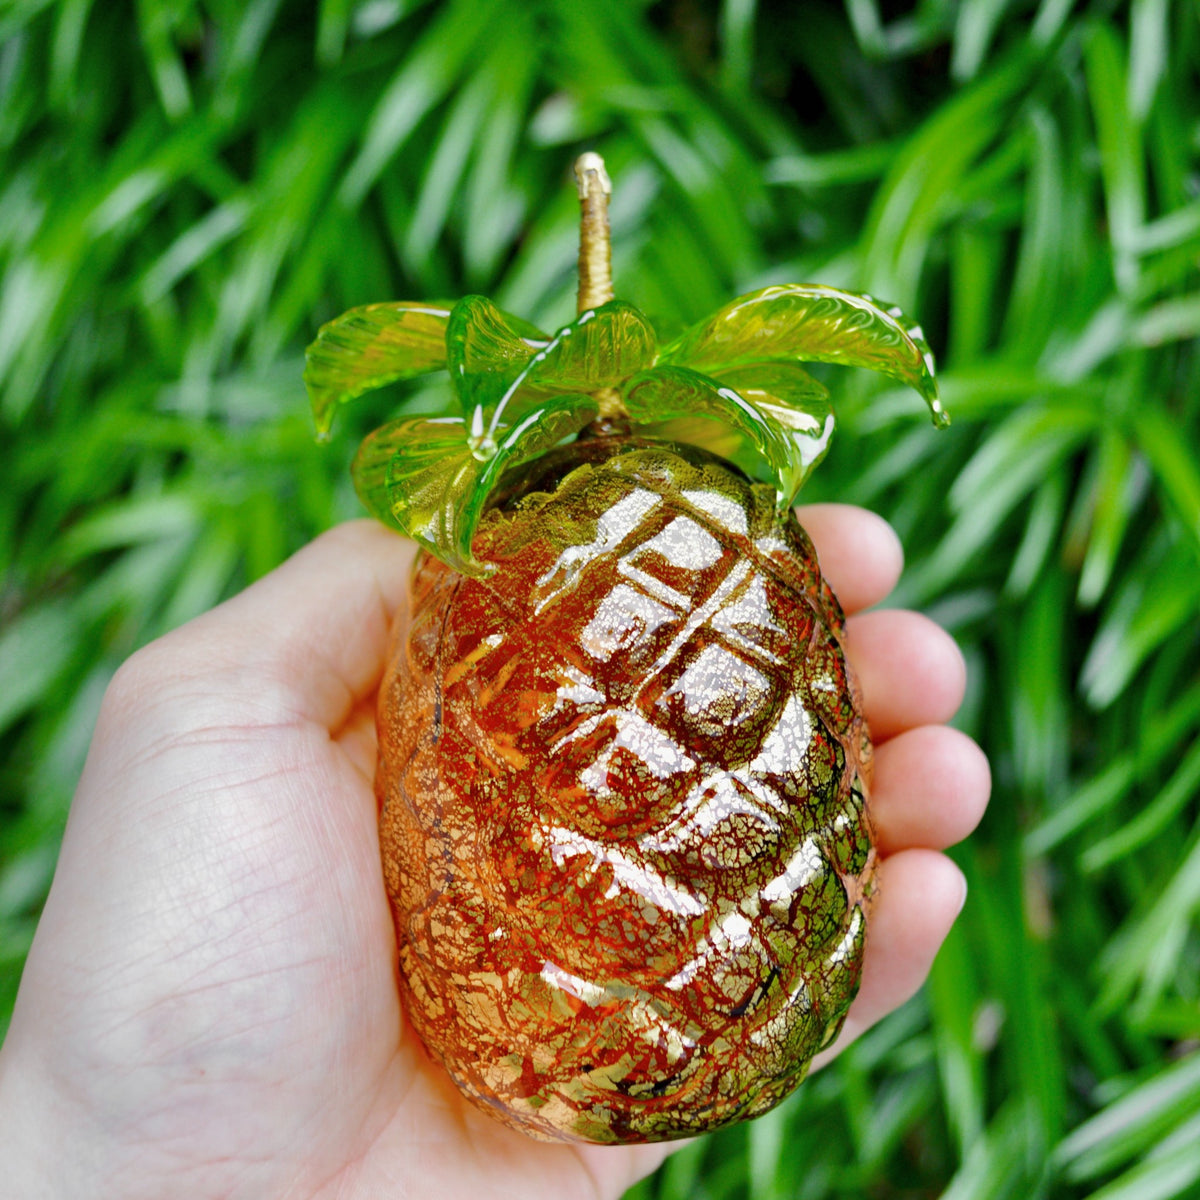 An amber colored glass pineapple with green leaves held in a hand.